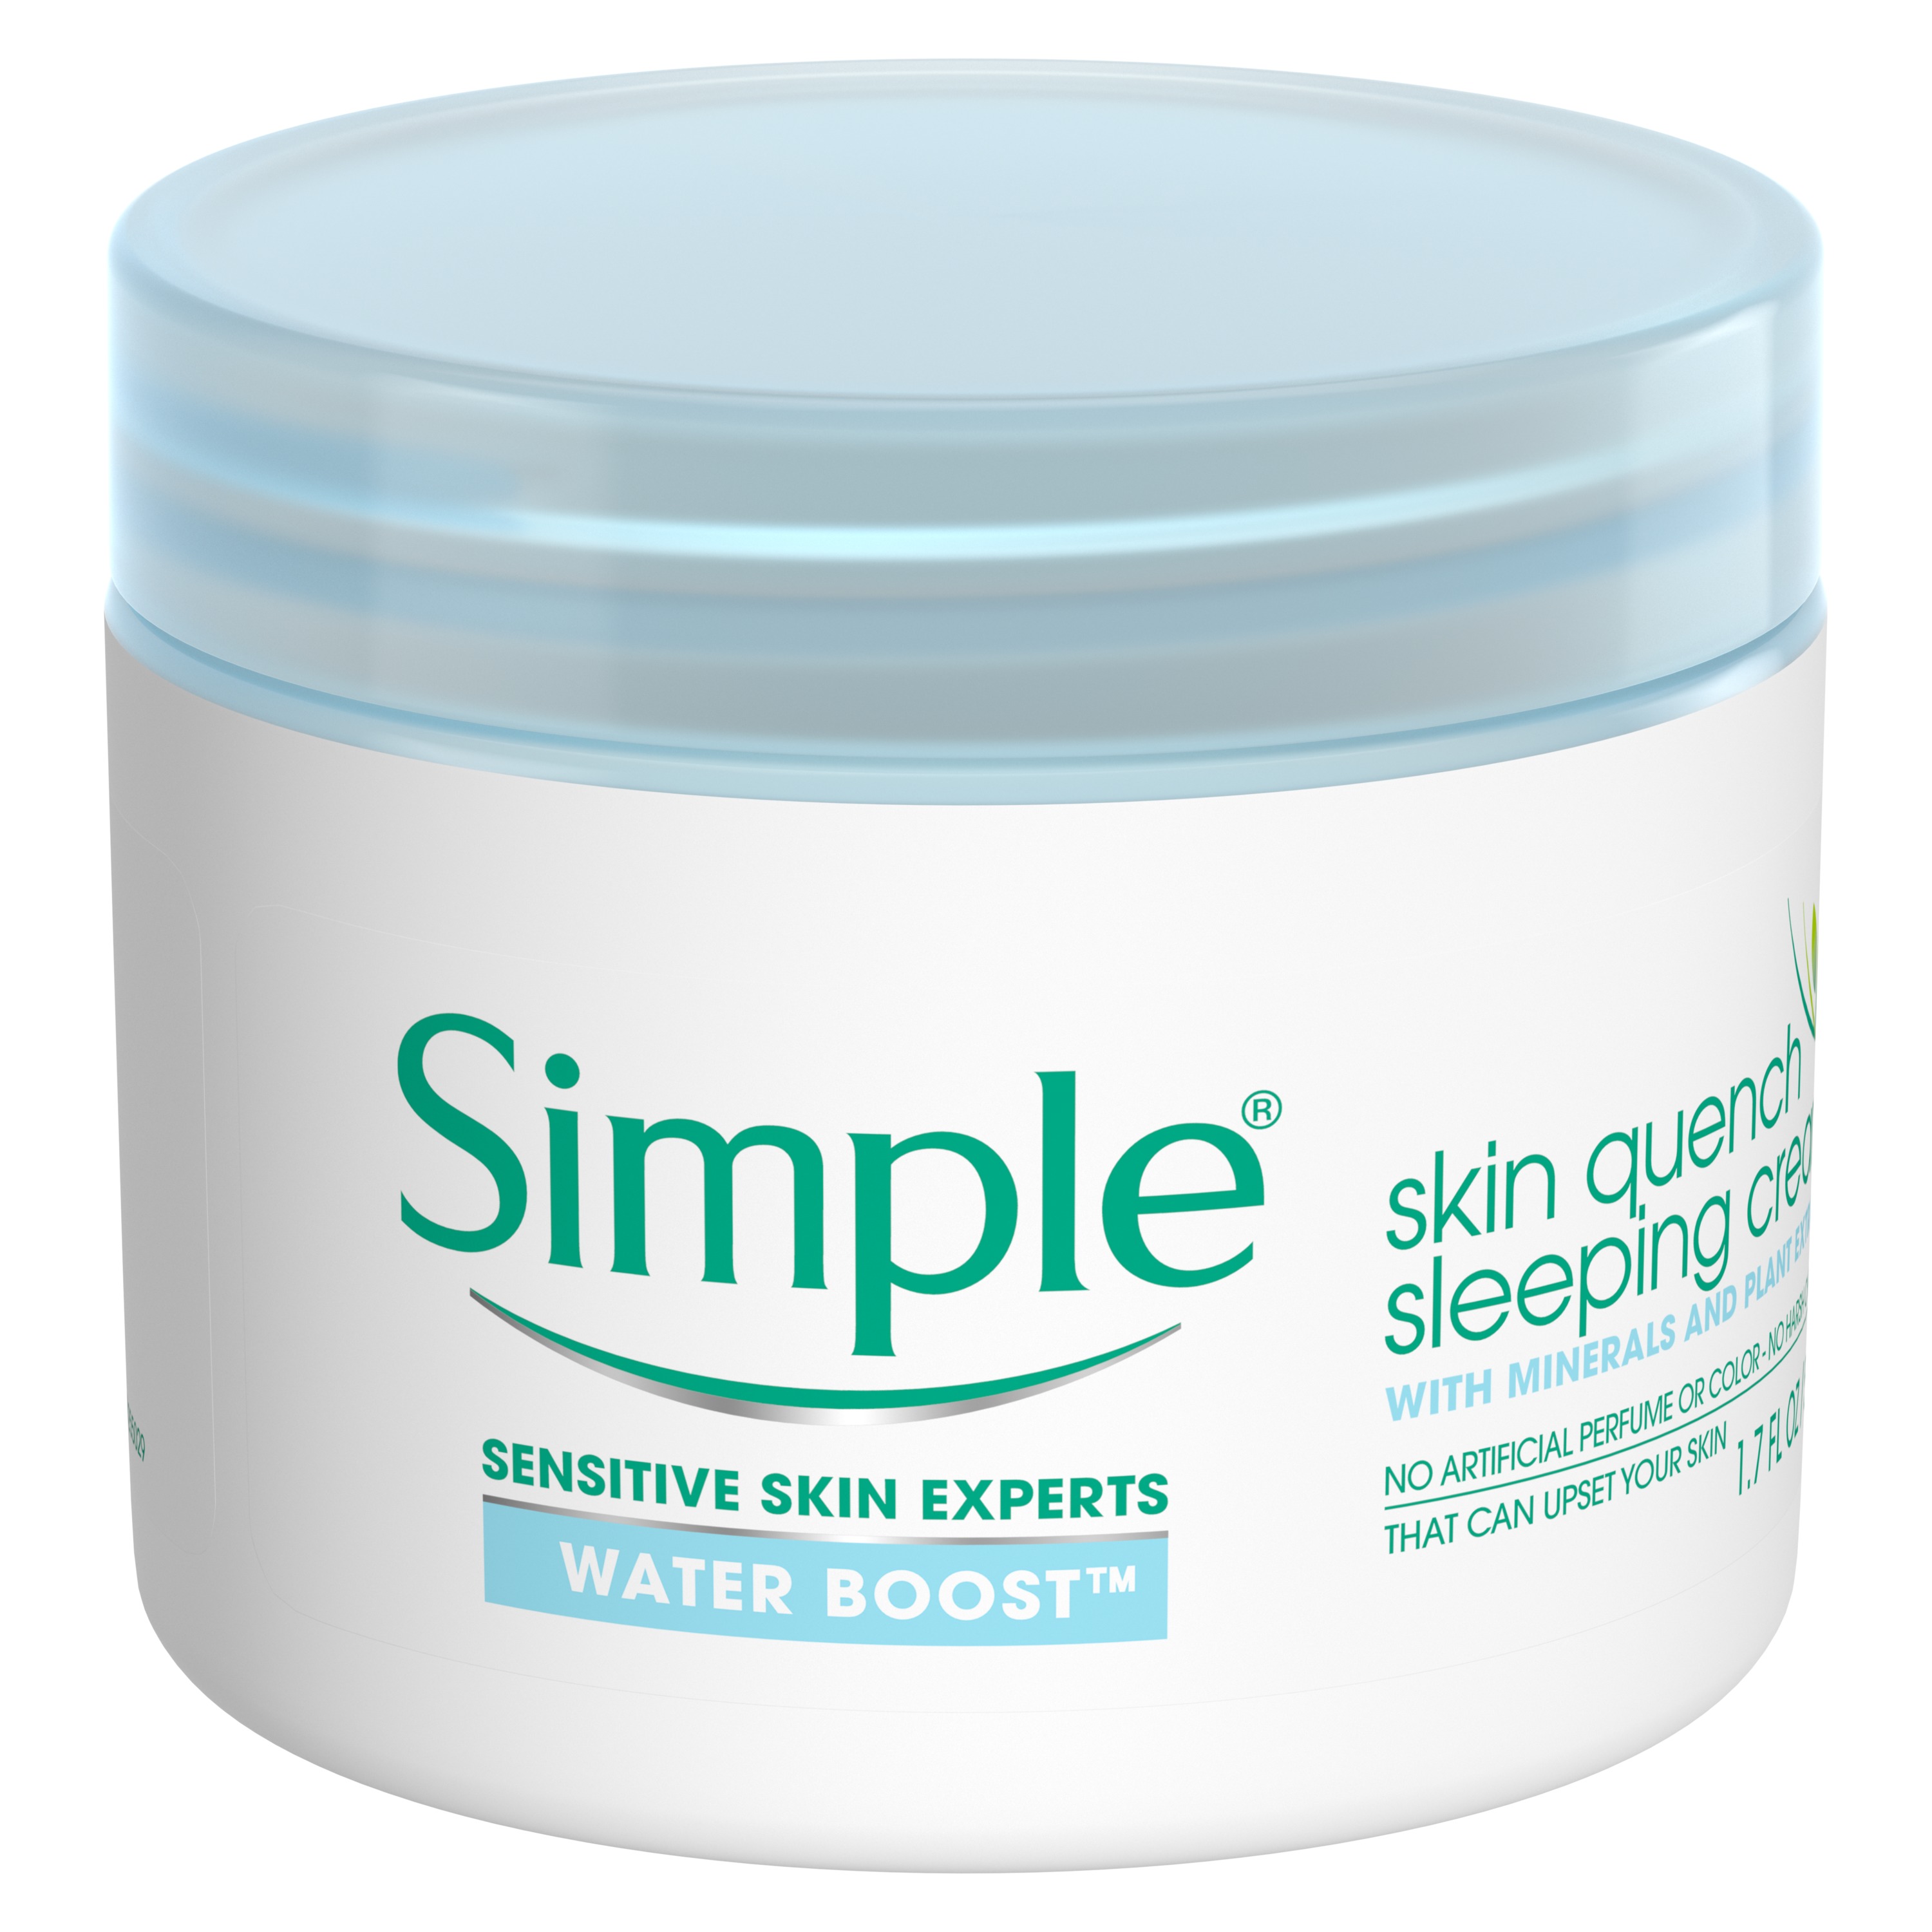 Simple Water Boost Skin Quench Sleeping Cream 1.7 oz - image 2 of 13